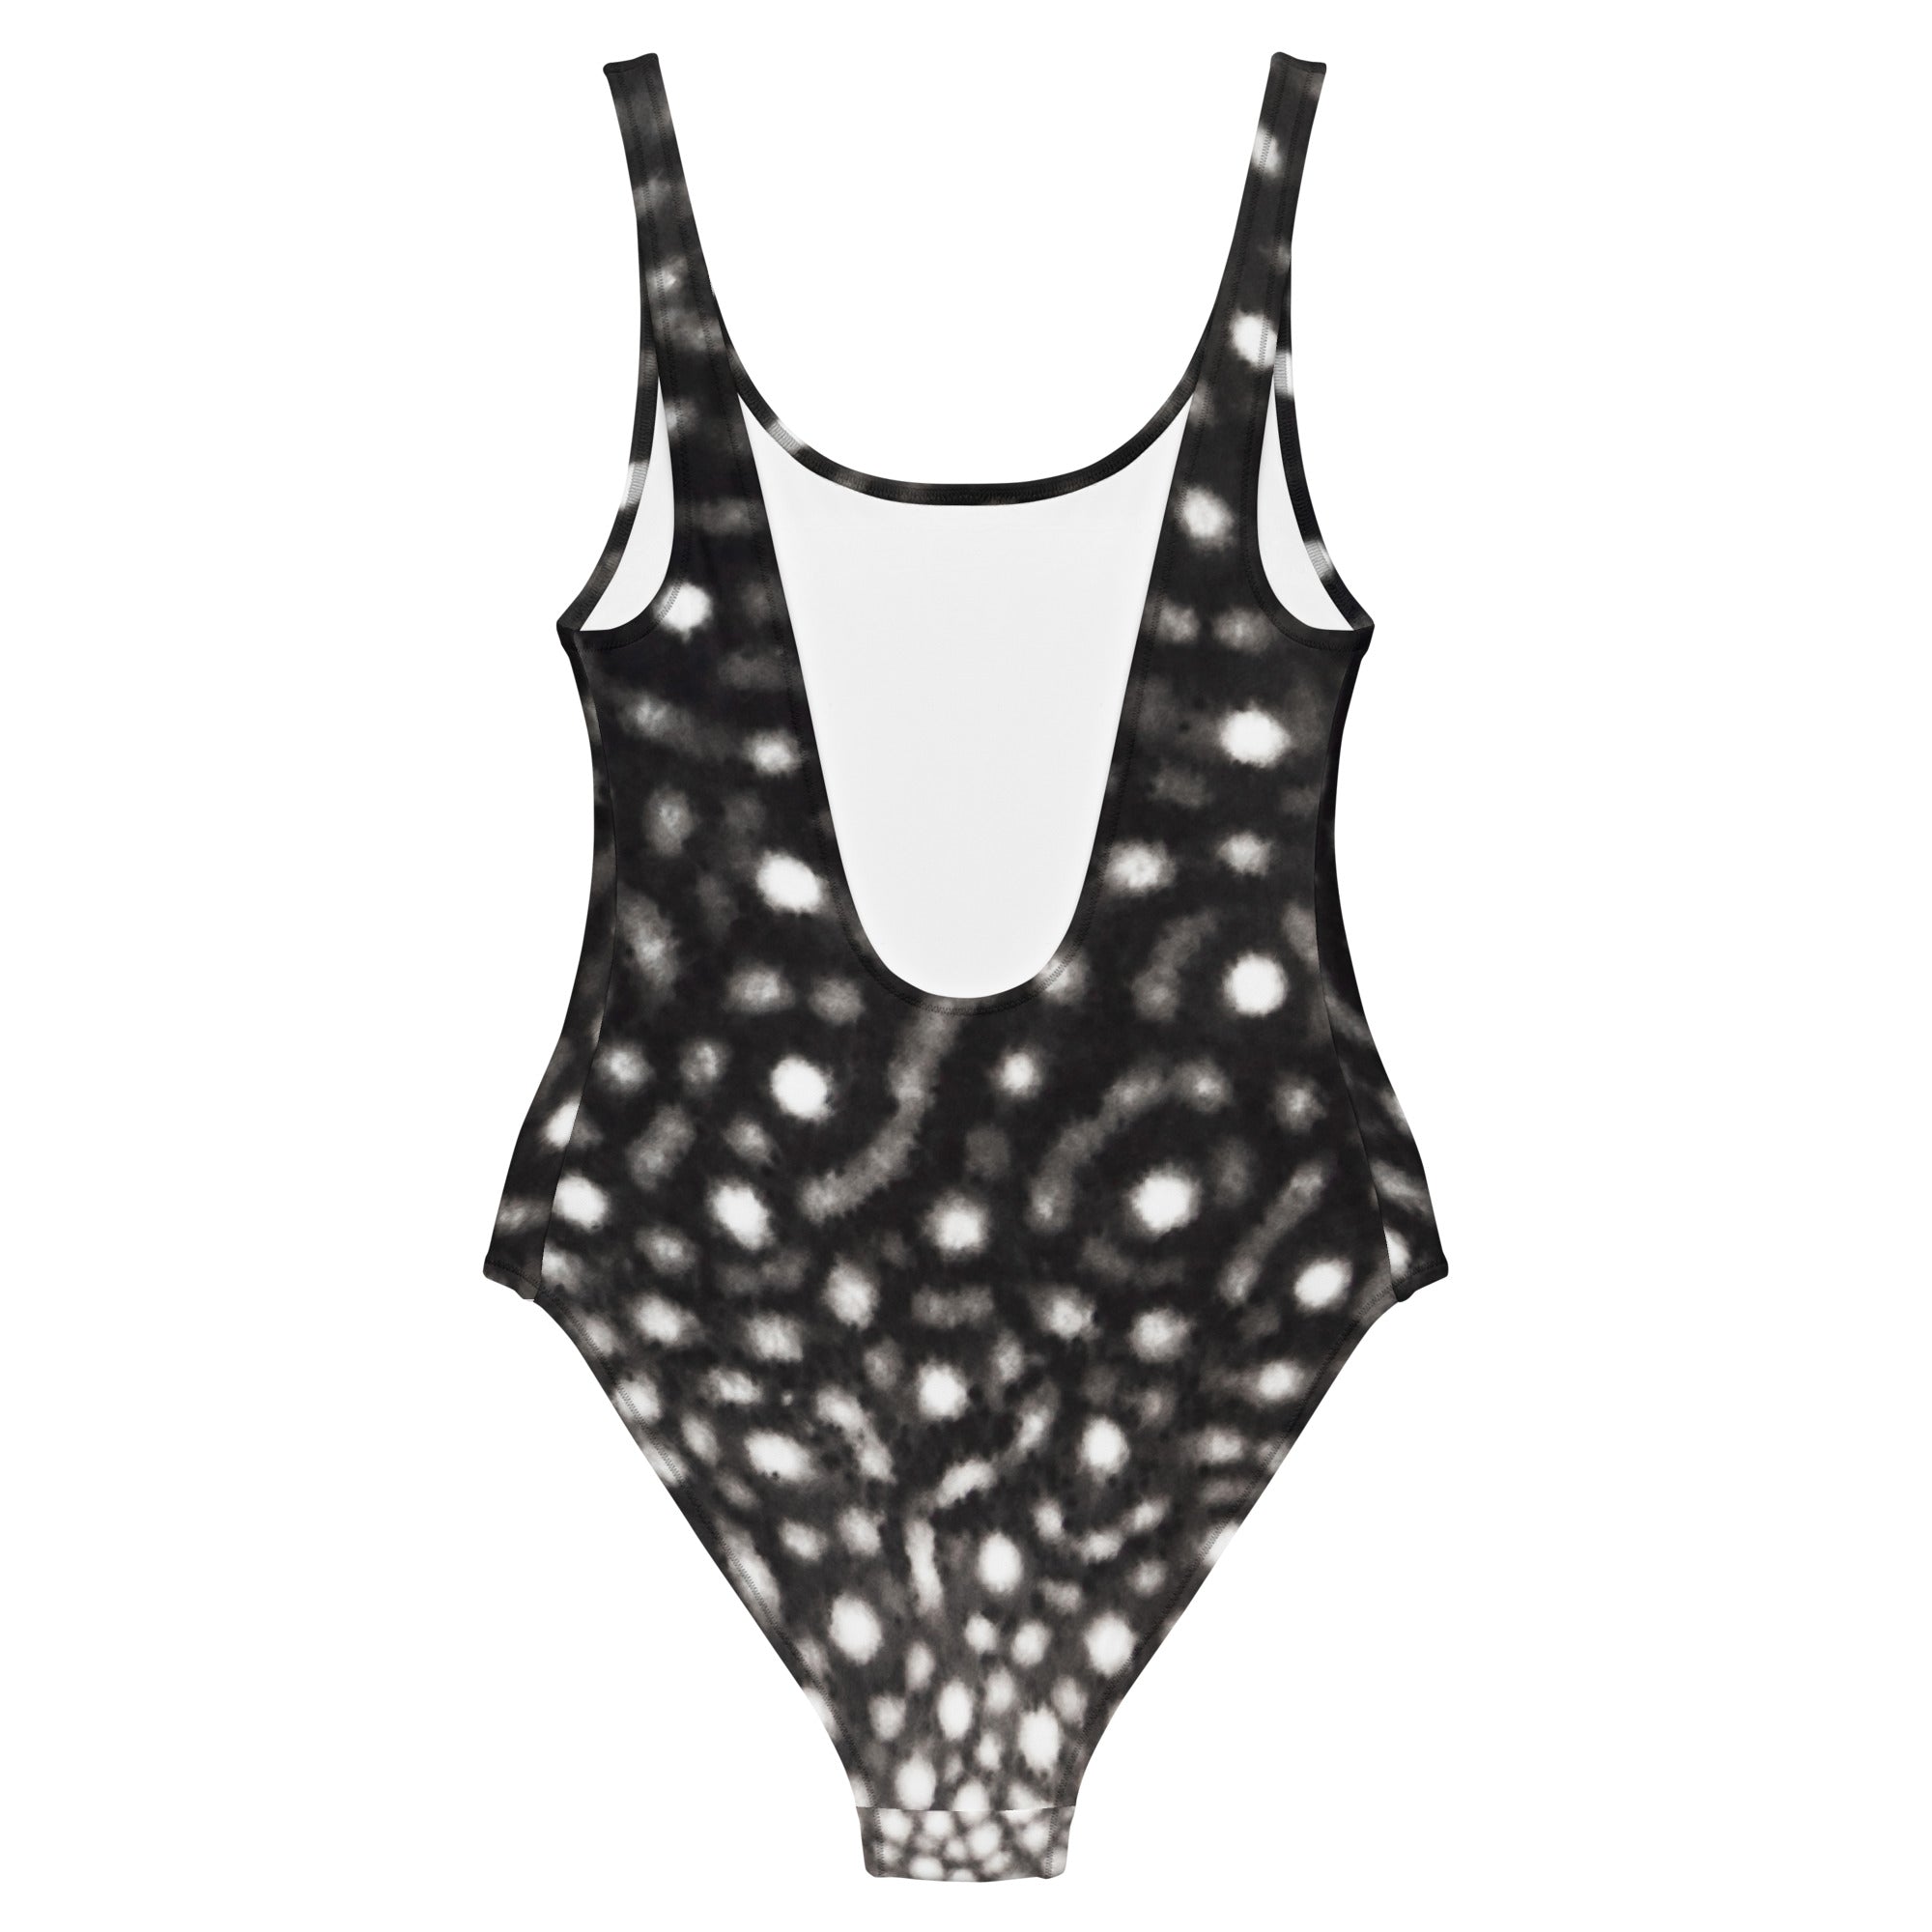 B&W Whale Shark One-Piece Swimsuit - Limited Edition